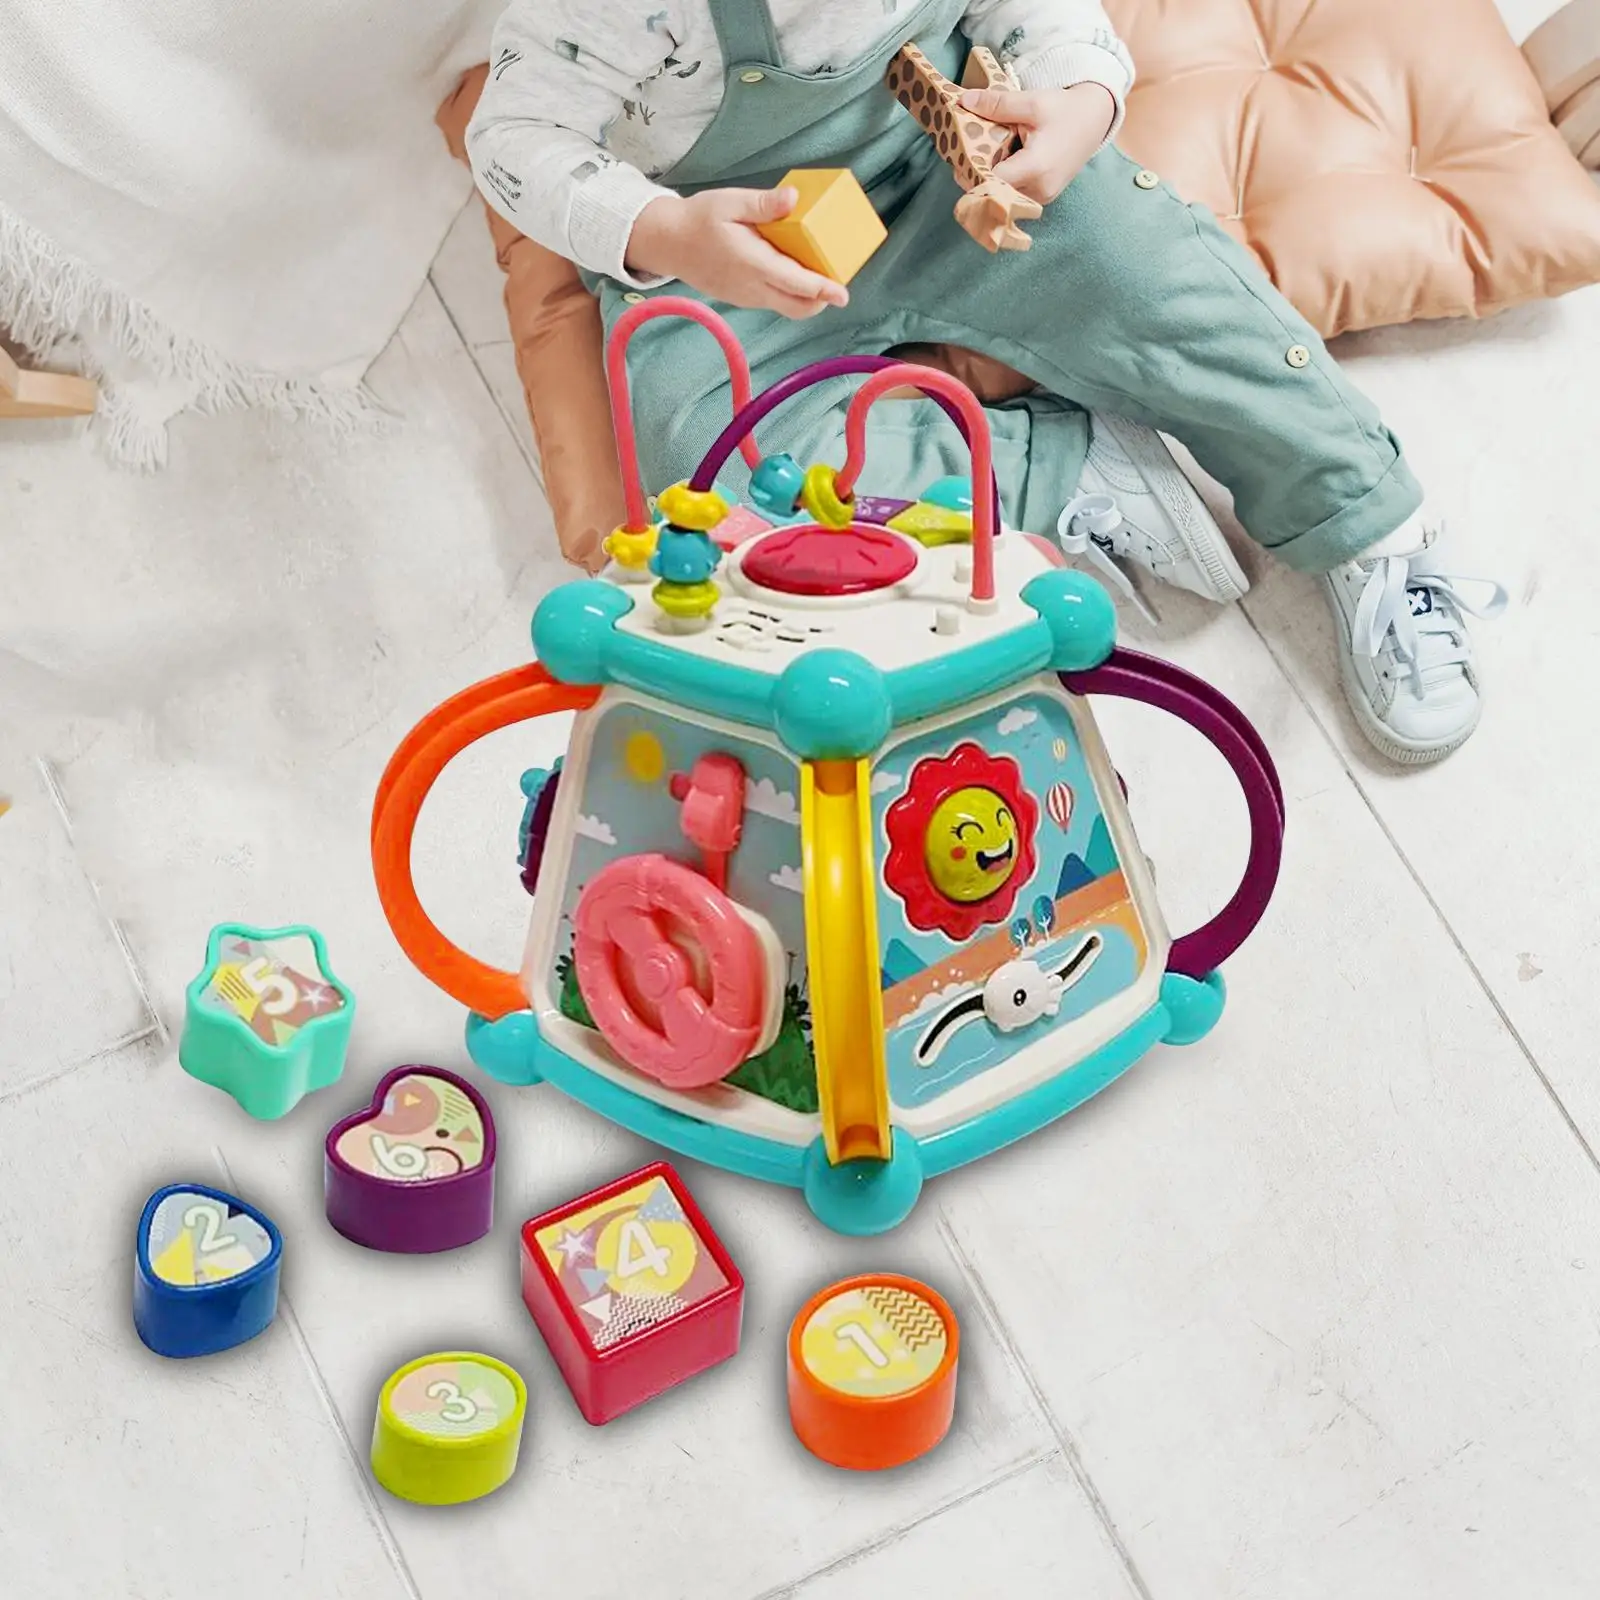 Baby Musical Toys Development Musical Activity Cube Toy for Toddlers Gift